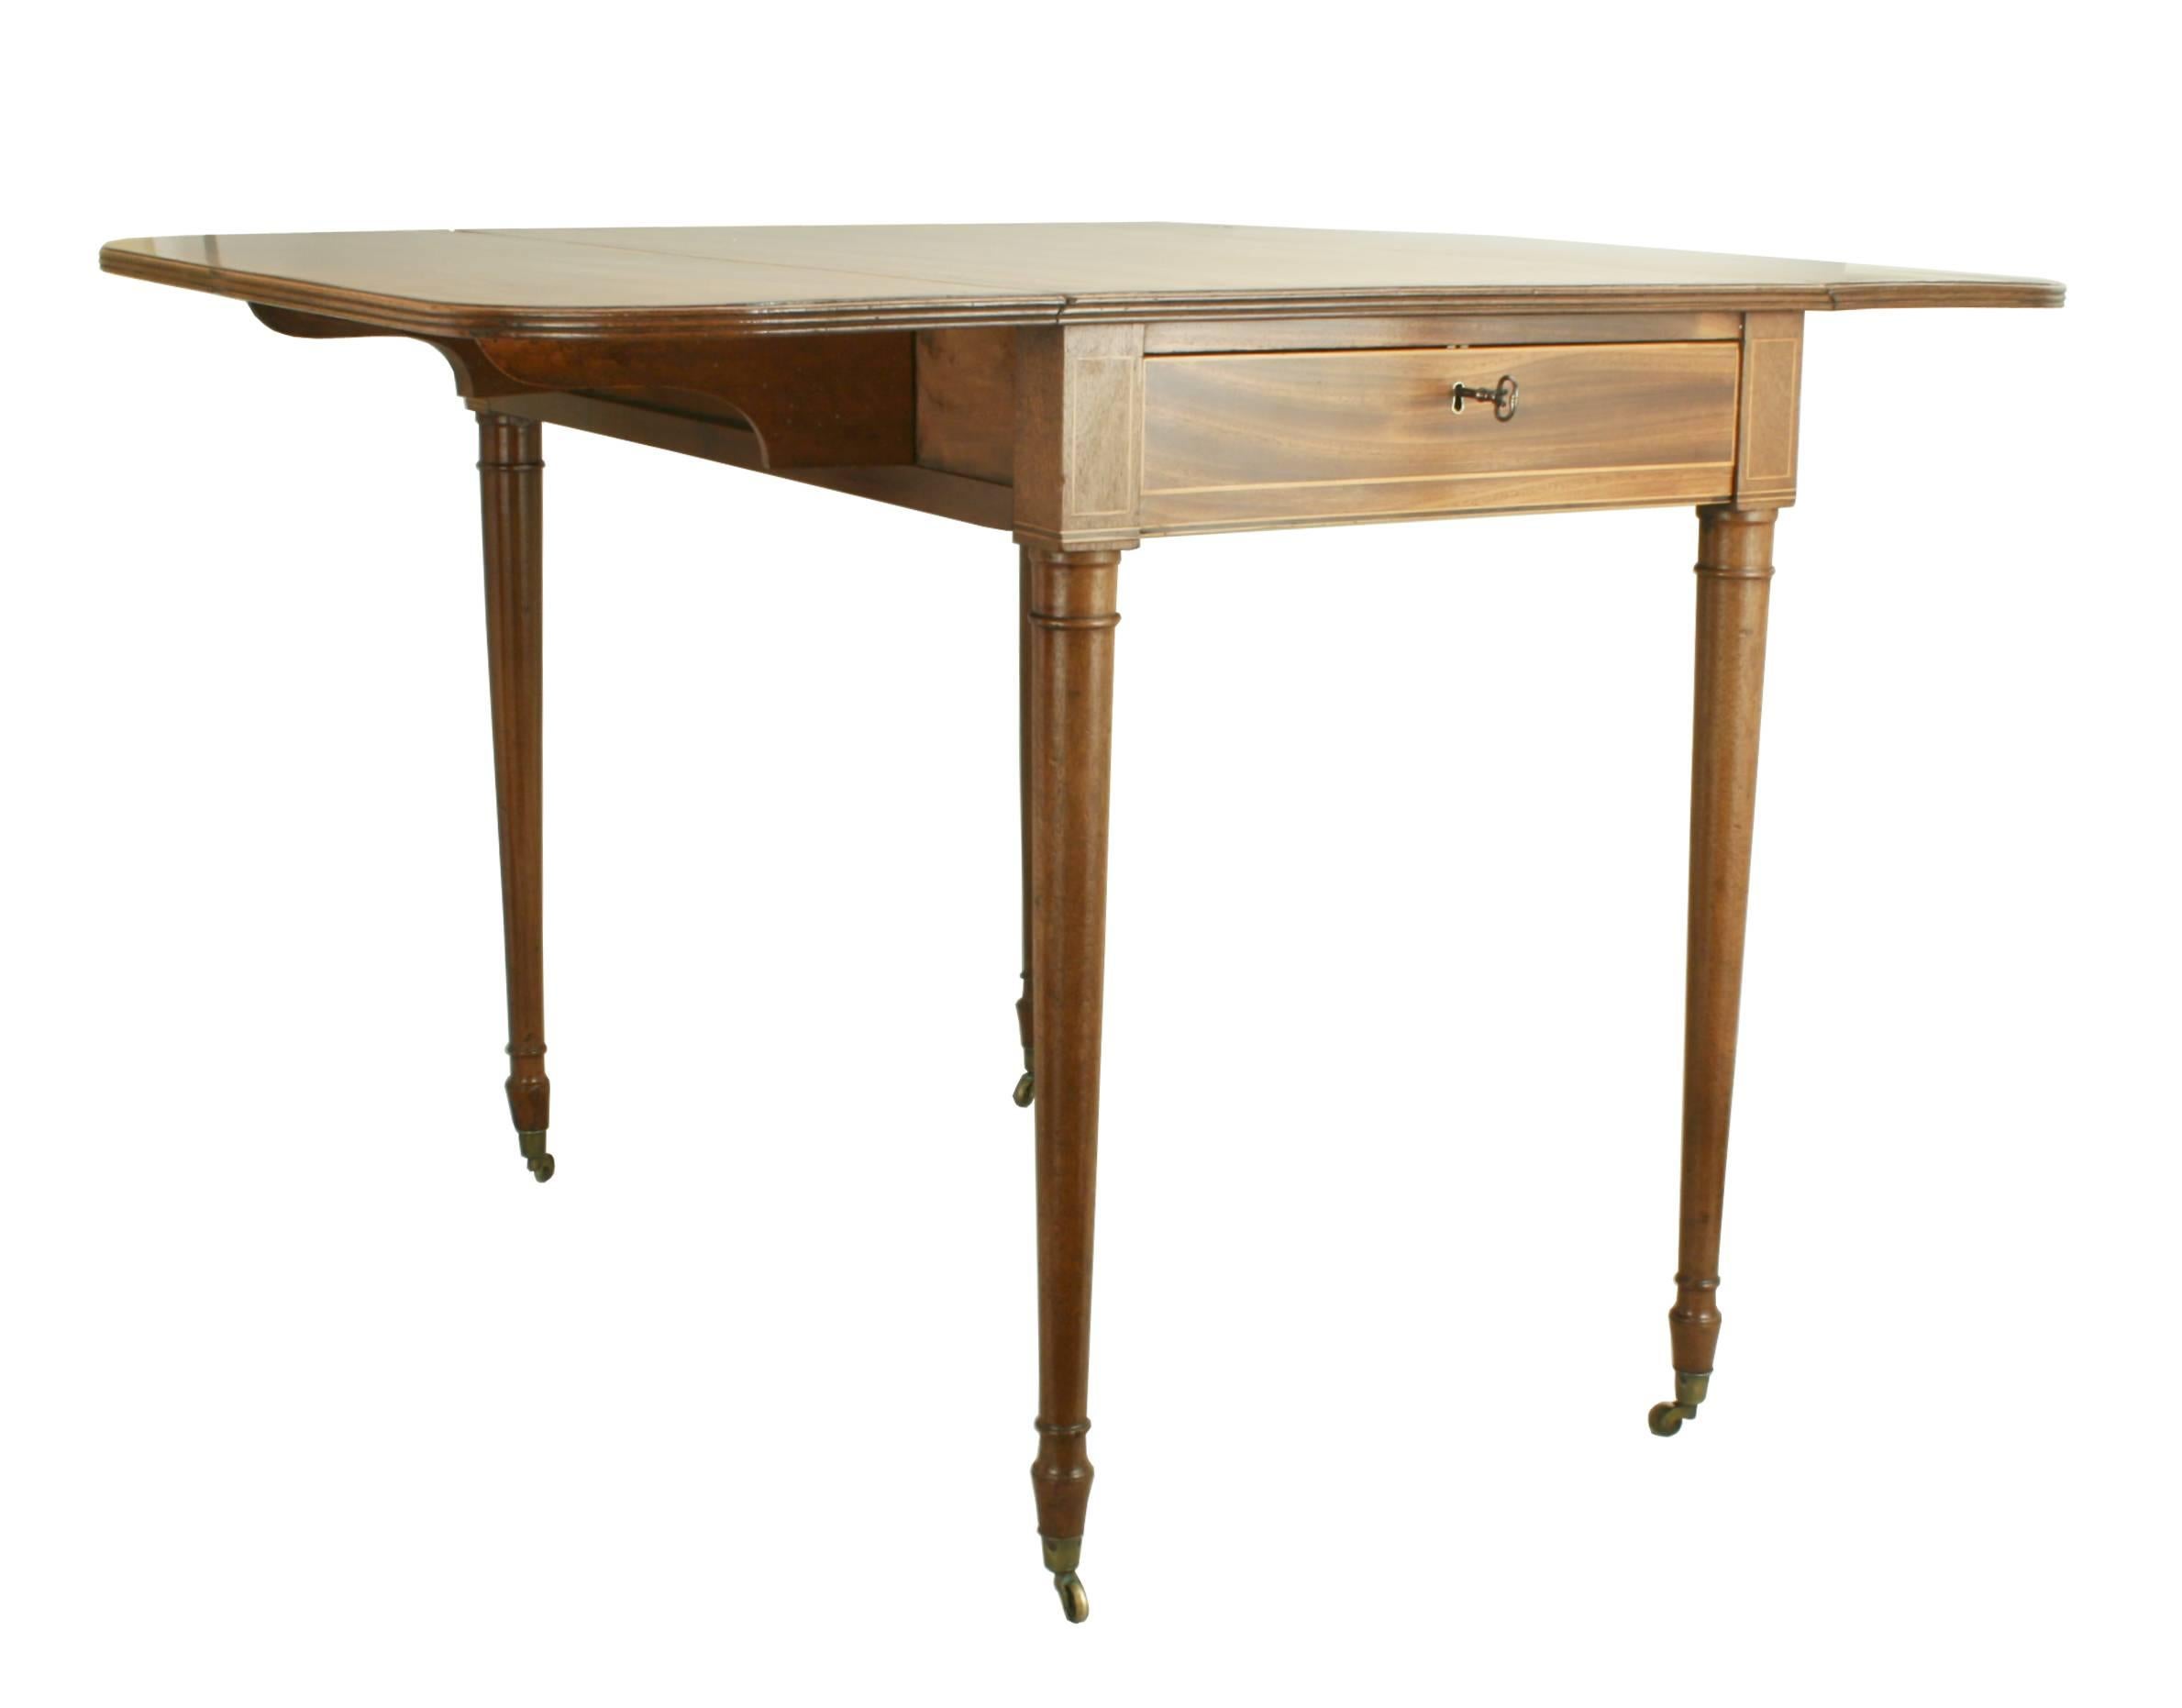 Mahogany Pembroke table.
A very nicely inlaid drop-leaf Pembroke table. The table has a rounded rectangular drop-leaf top with satinwood crossbanding with further ebony and boxwood stringing. There is a single drawer with an opposing dummy drawer